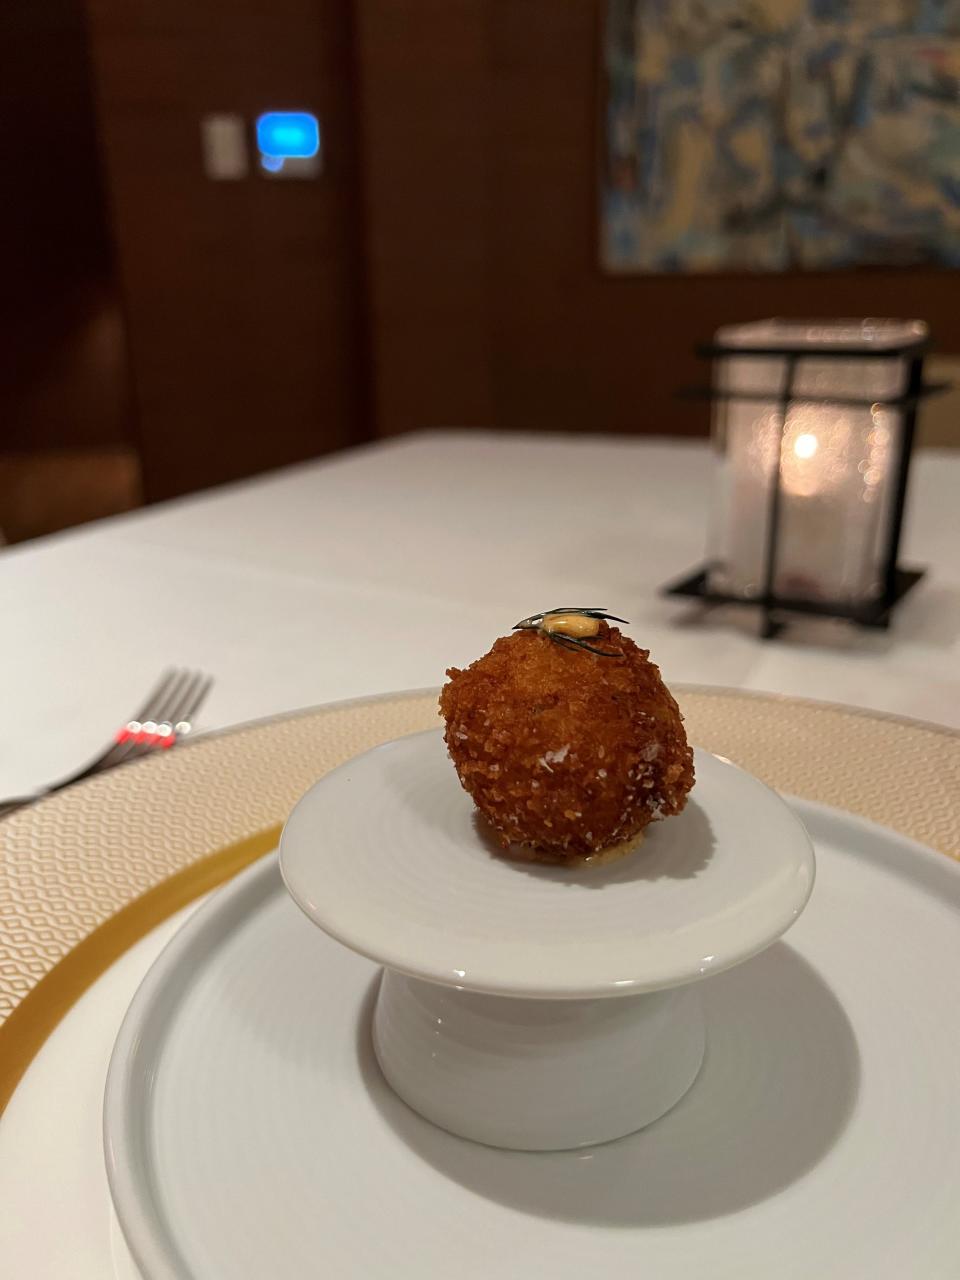 The amuse-bouche, a gift from the chef, set the tone for dinner at Oak Park.